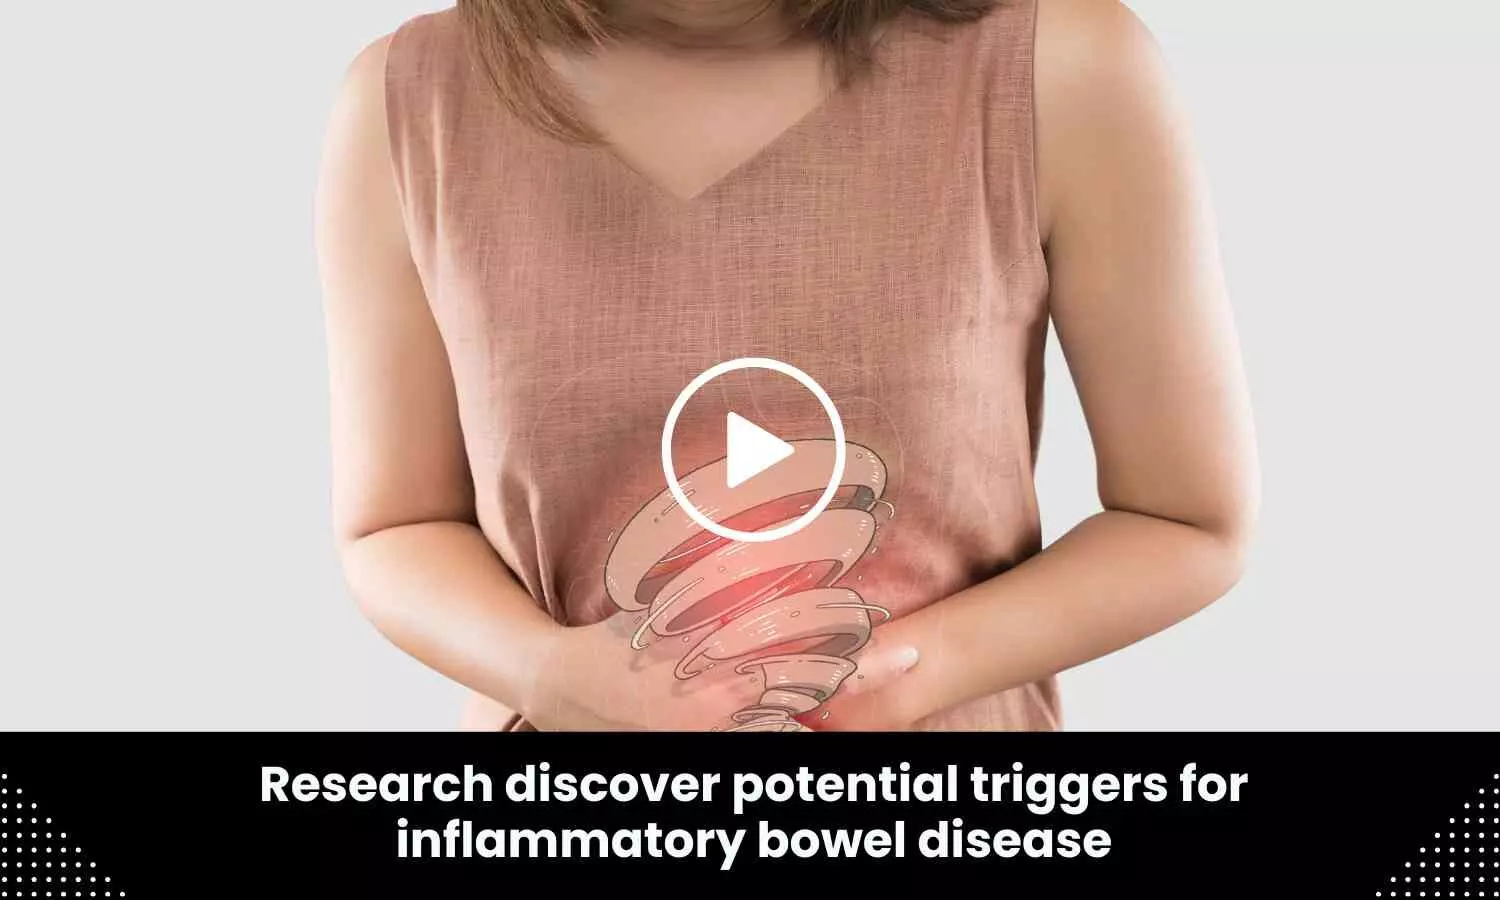 Research discover potential triggers for inflammatory bowel disease